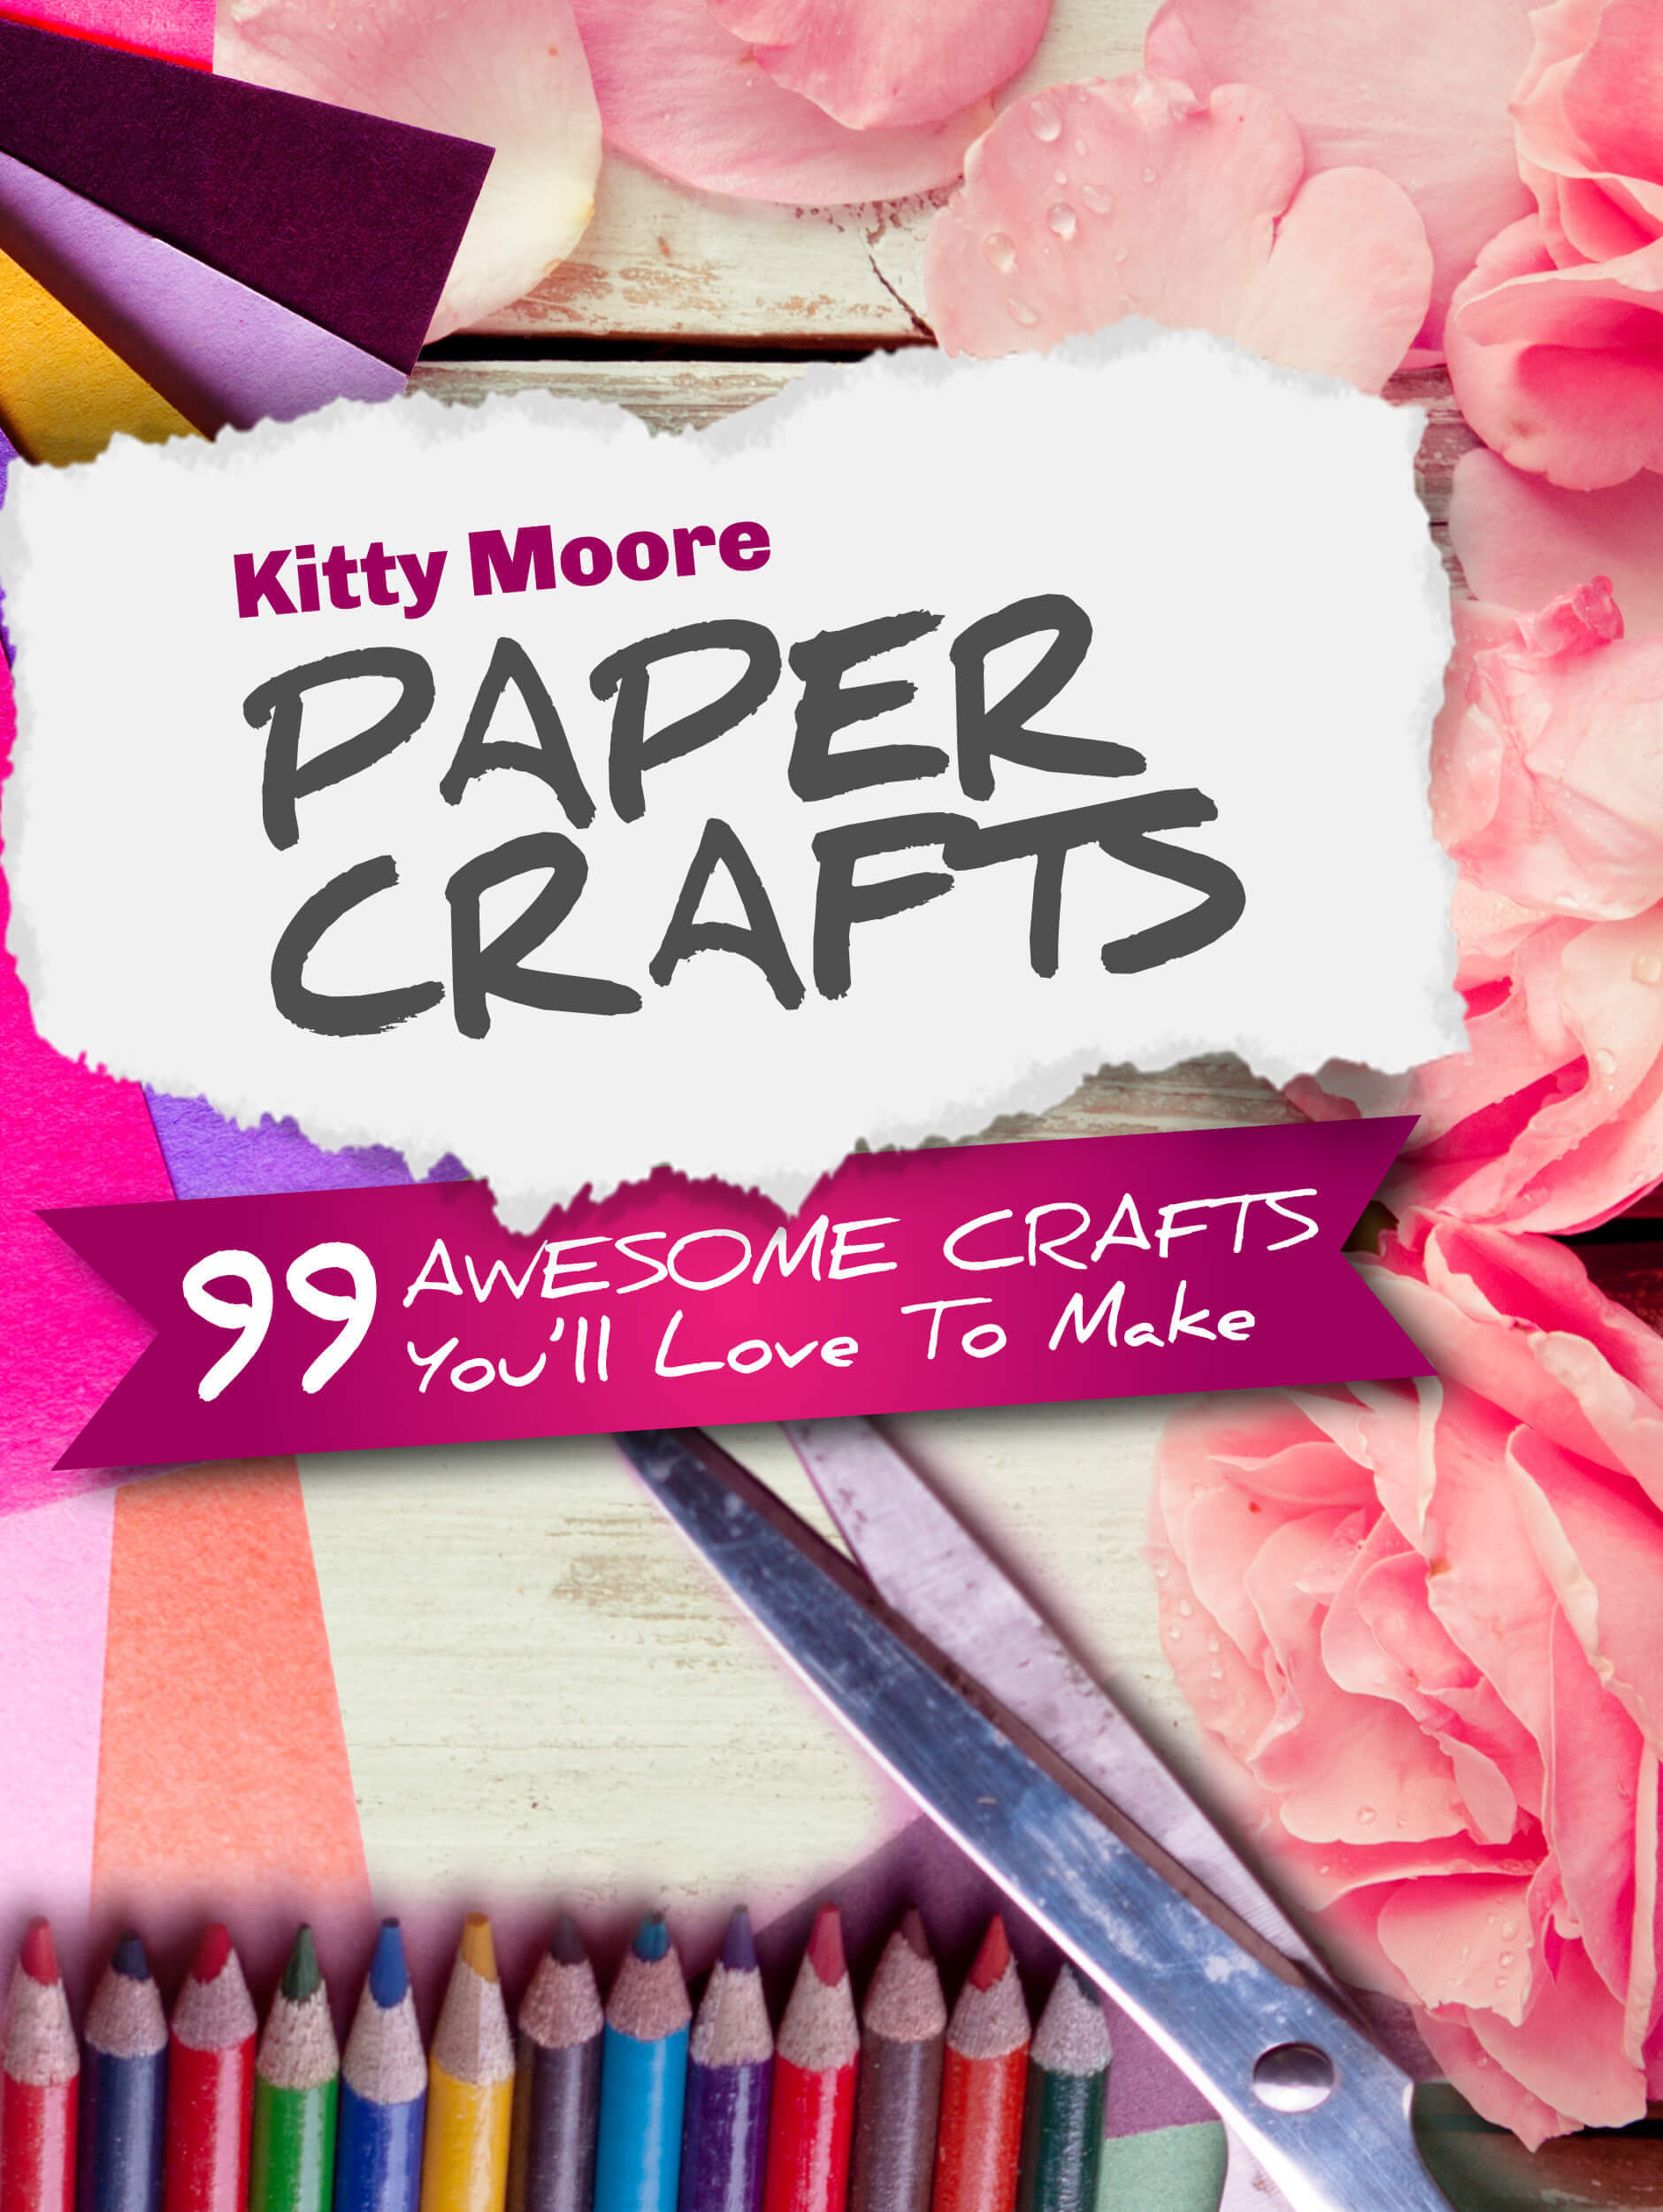 FREE: Paper Crafts (5th Edition): 99 Awesome Crafts You’ll Love To Make! by Kitty Moore